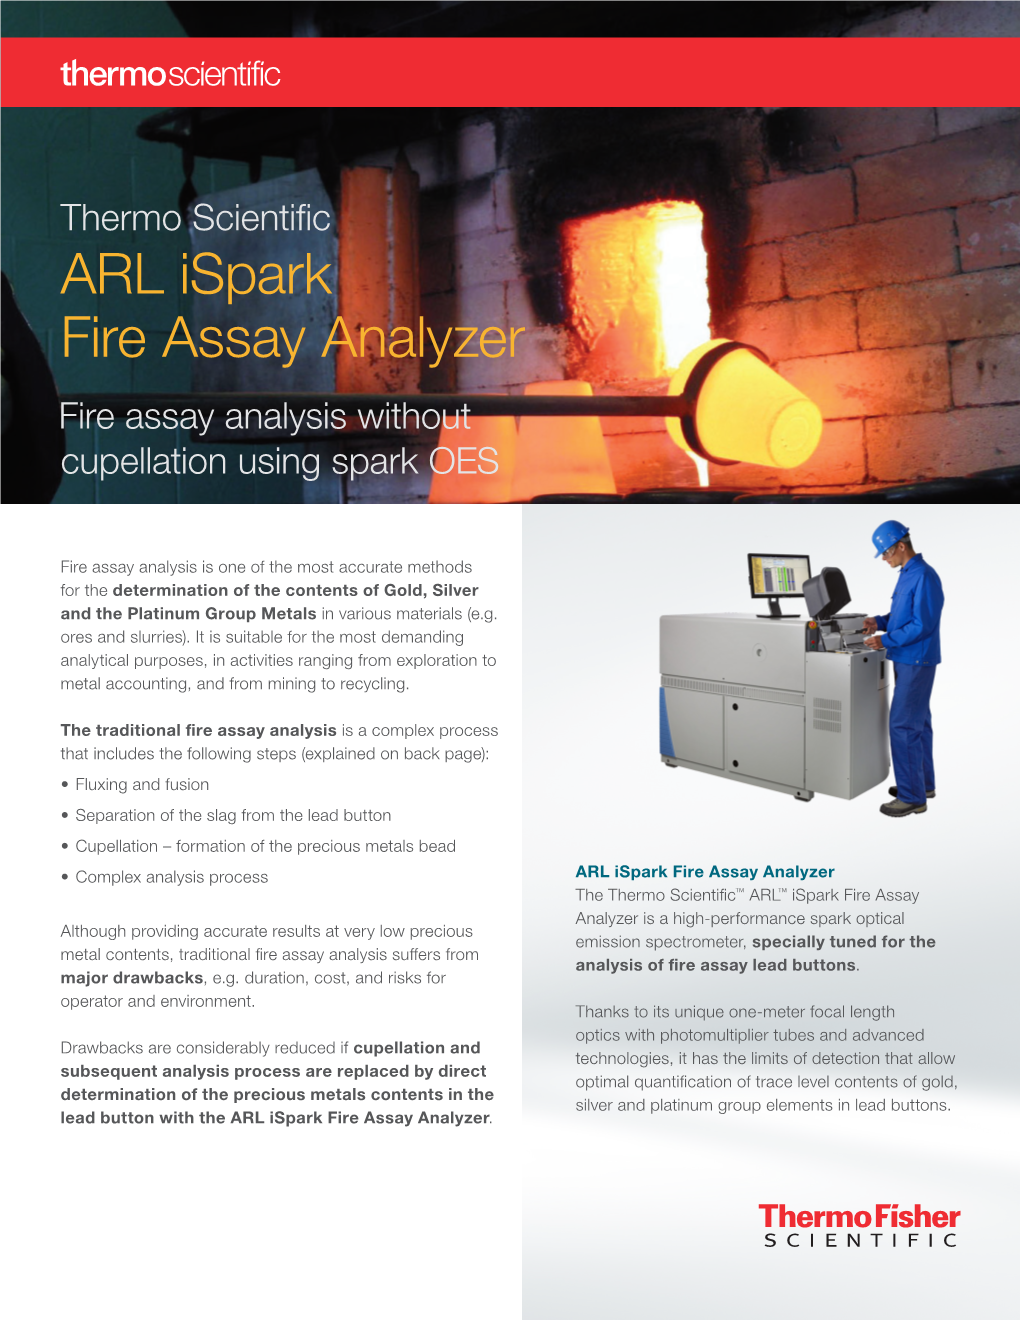 ARL Ispark Fire Assay Analyzer Fire Assay Analysis Without Cupellation Using Spark OES